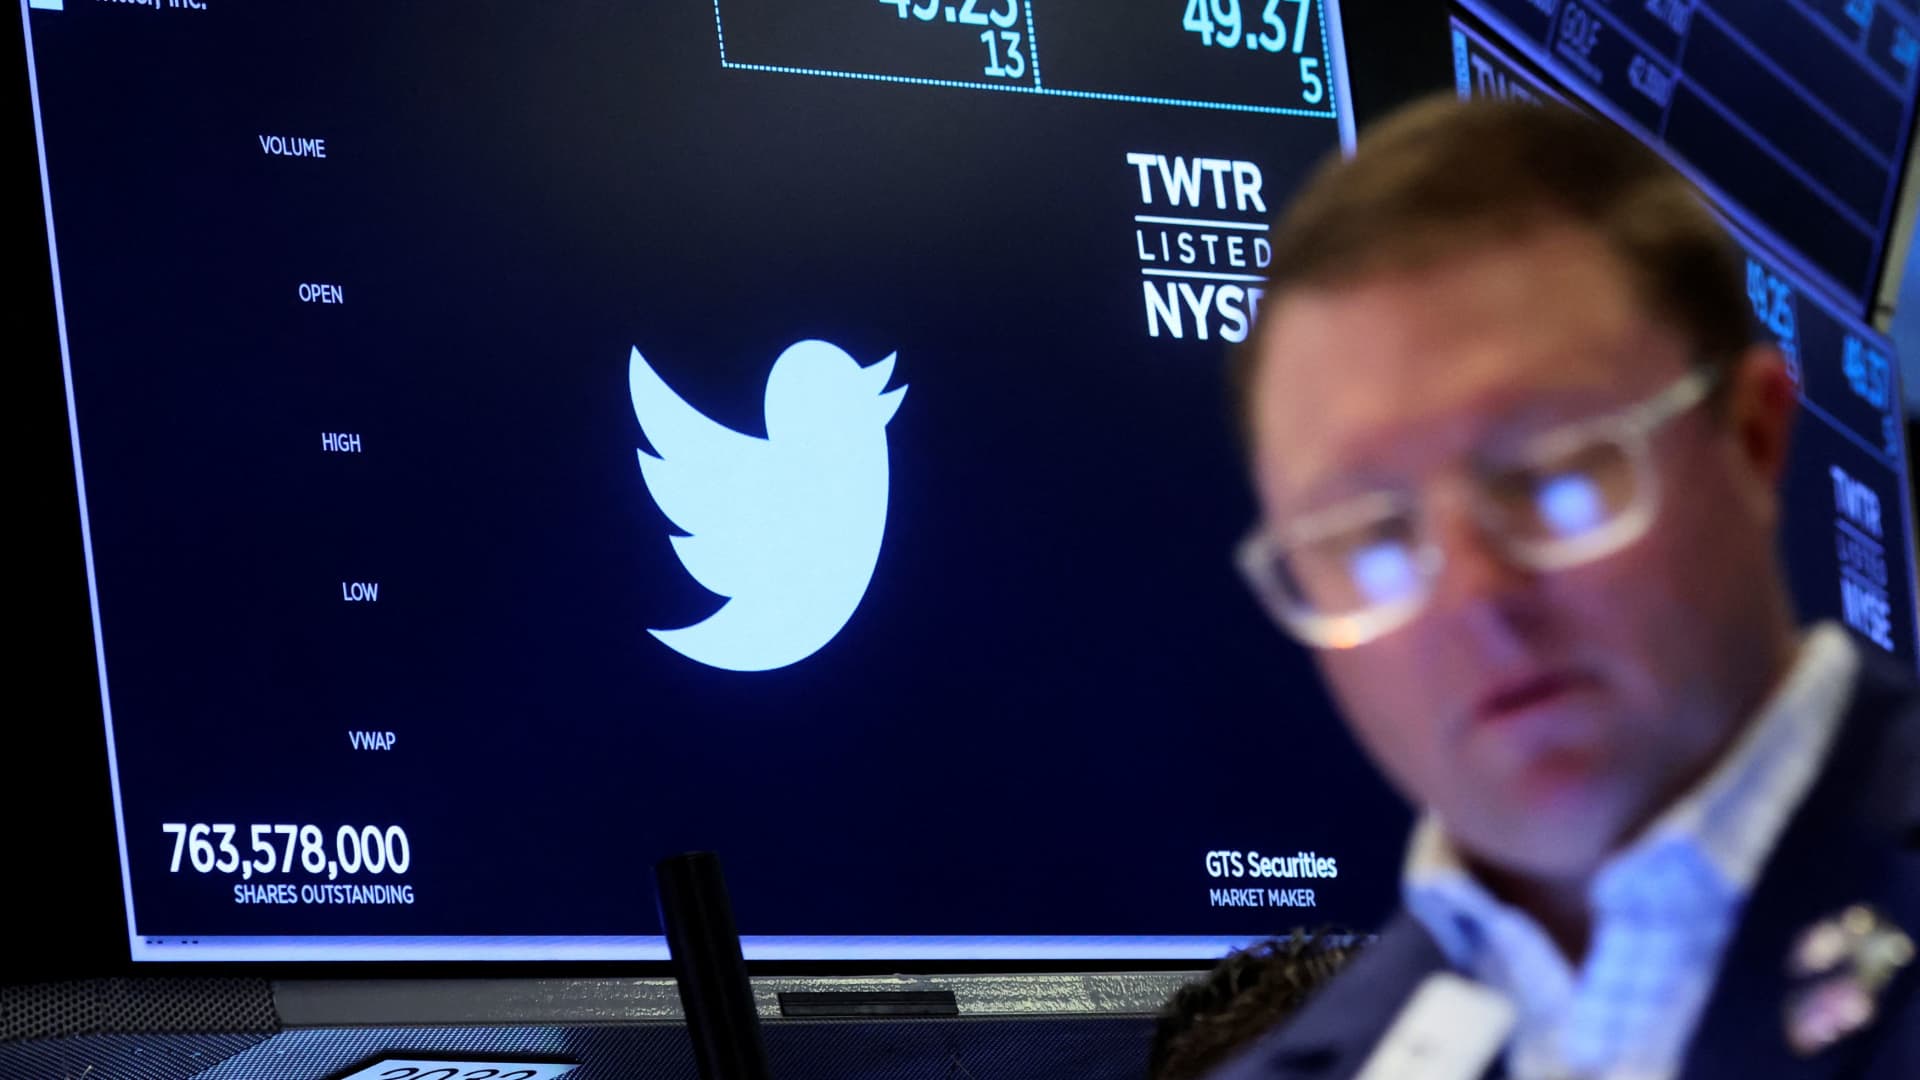 Twitter says it significantly slowed hiring during the second quarter